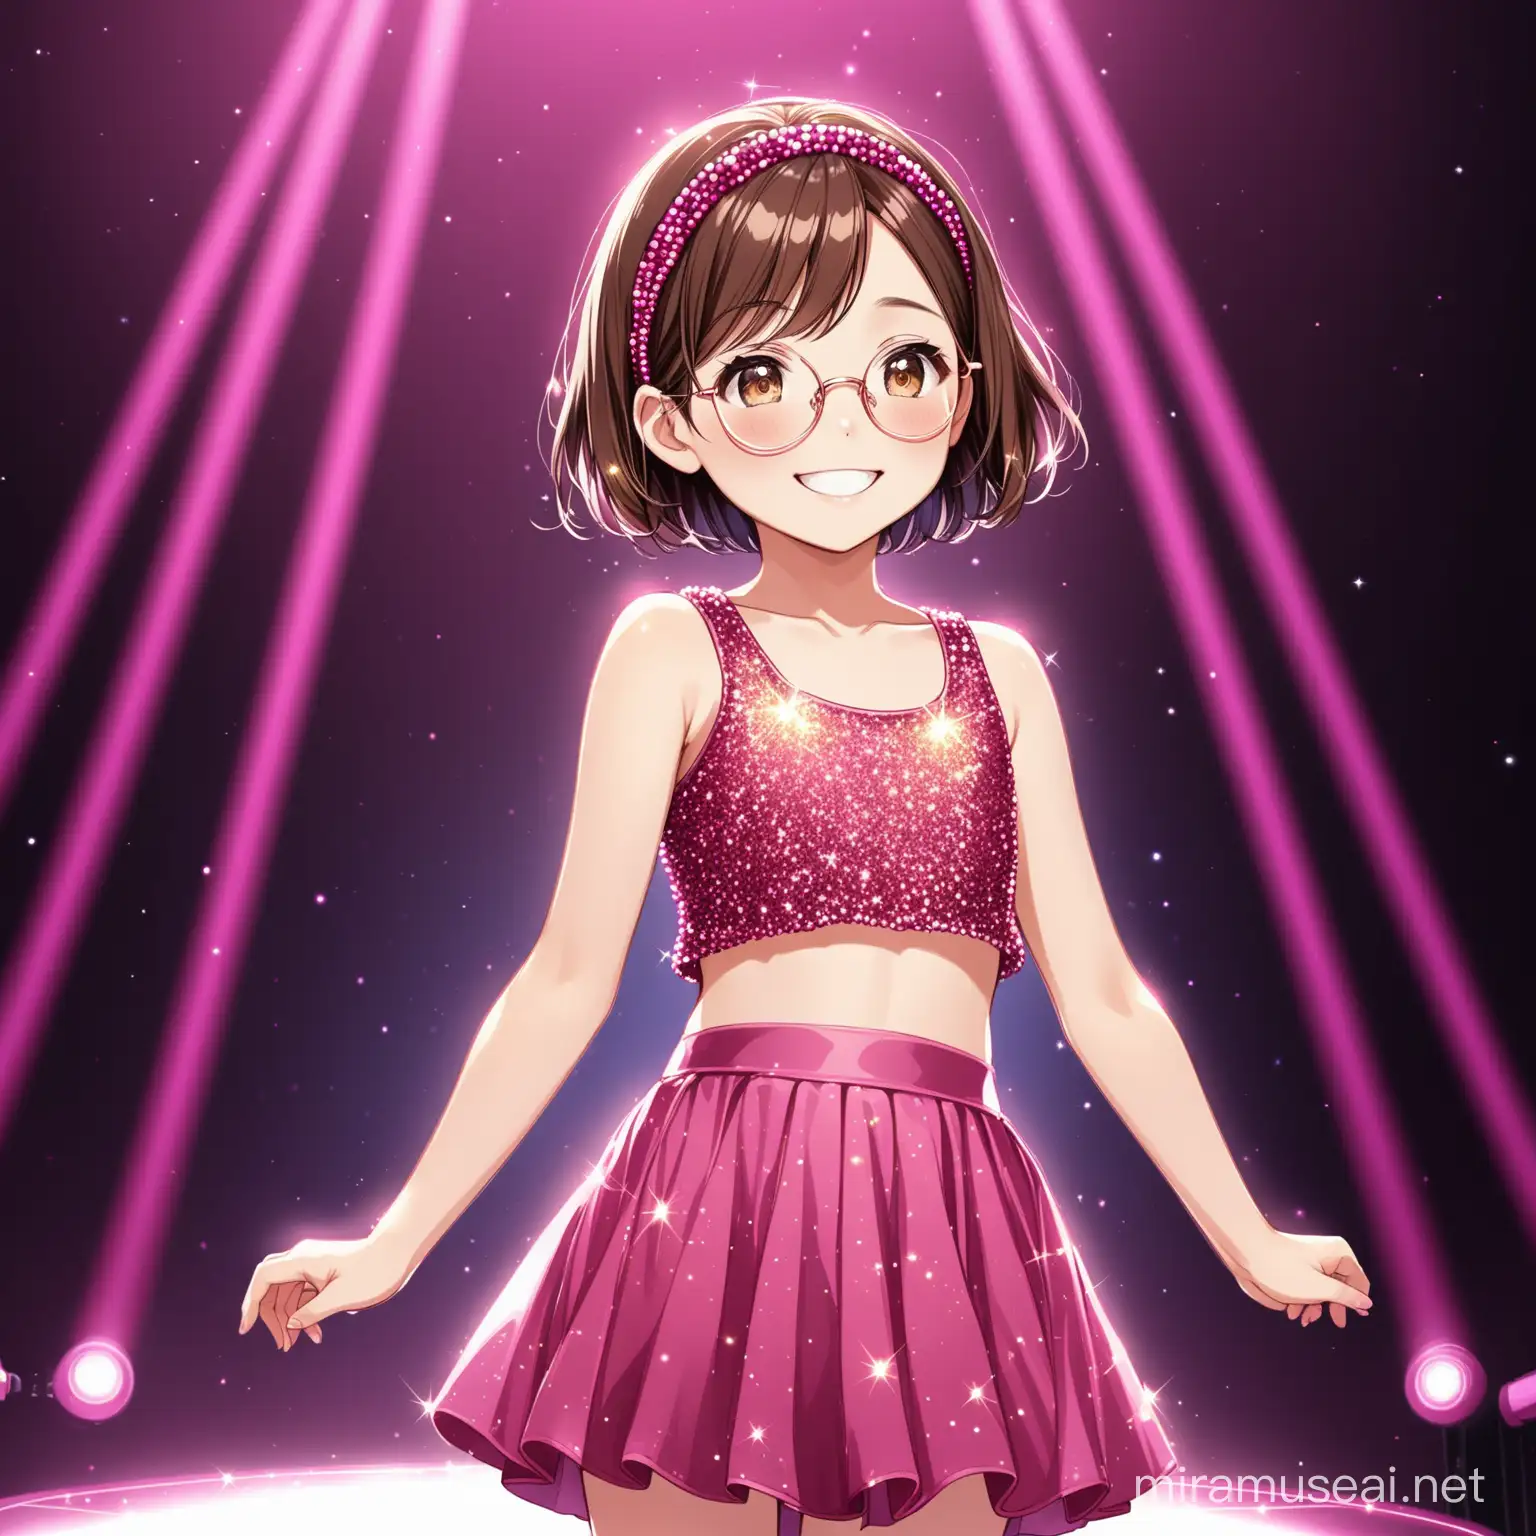 Smiling 12YearOld Girl in Sparkly Dark Pink Ensemble on Stage